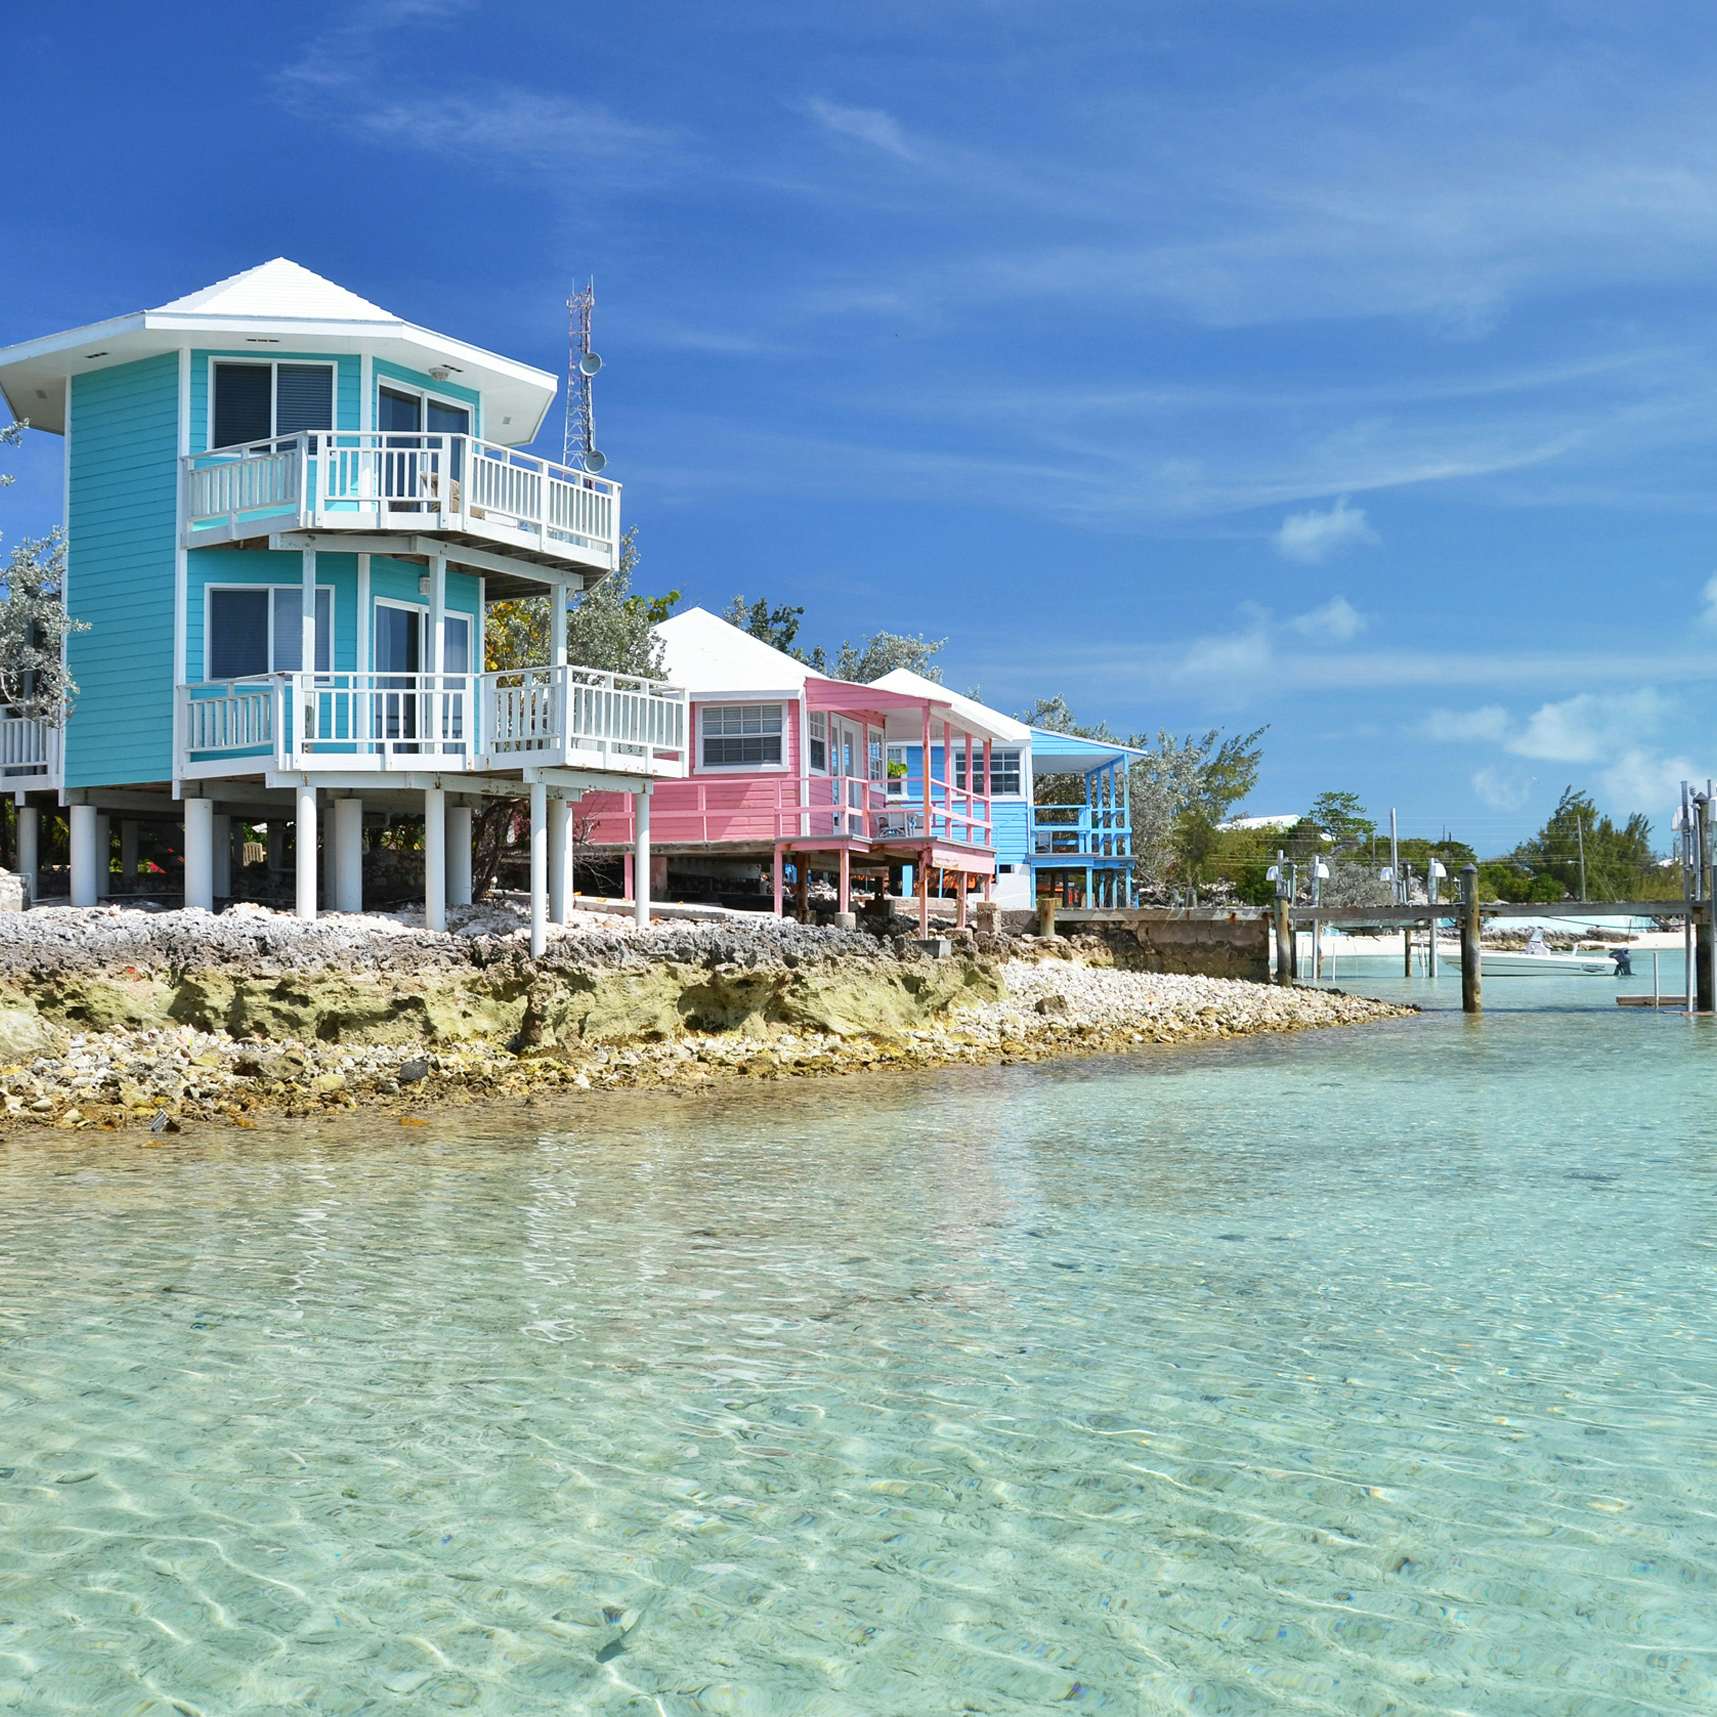 Picturesque house constructions at waters edge of Staniel cay